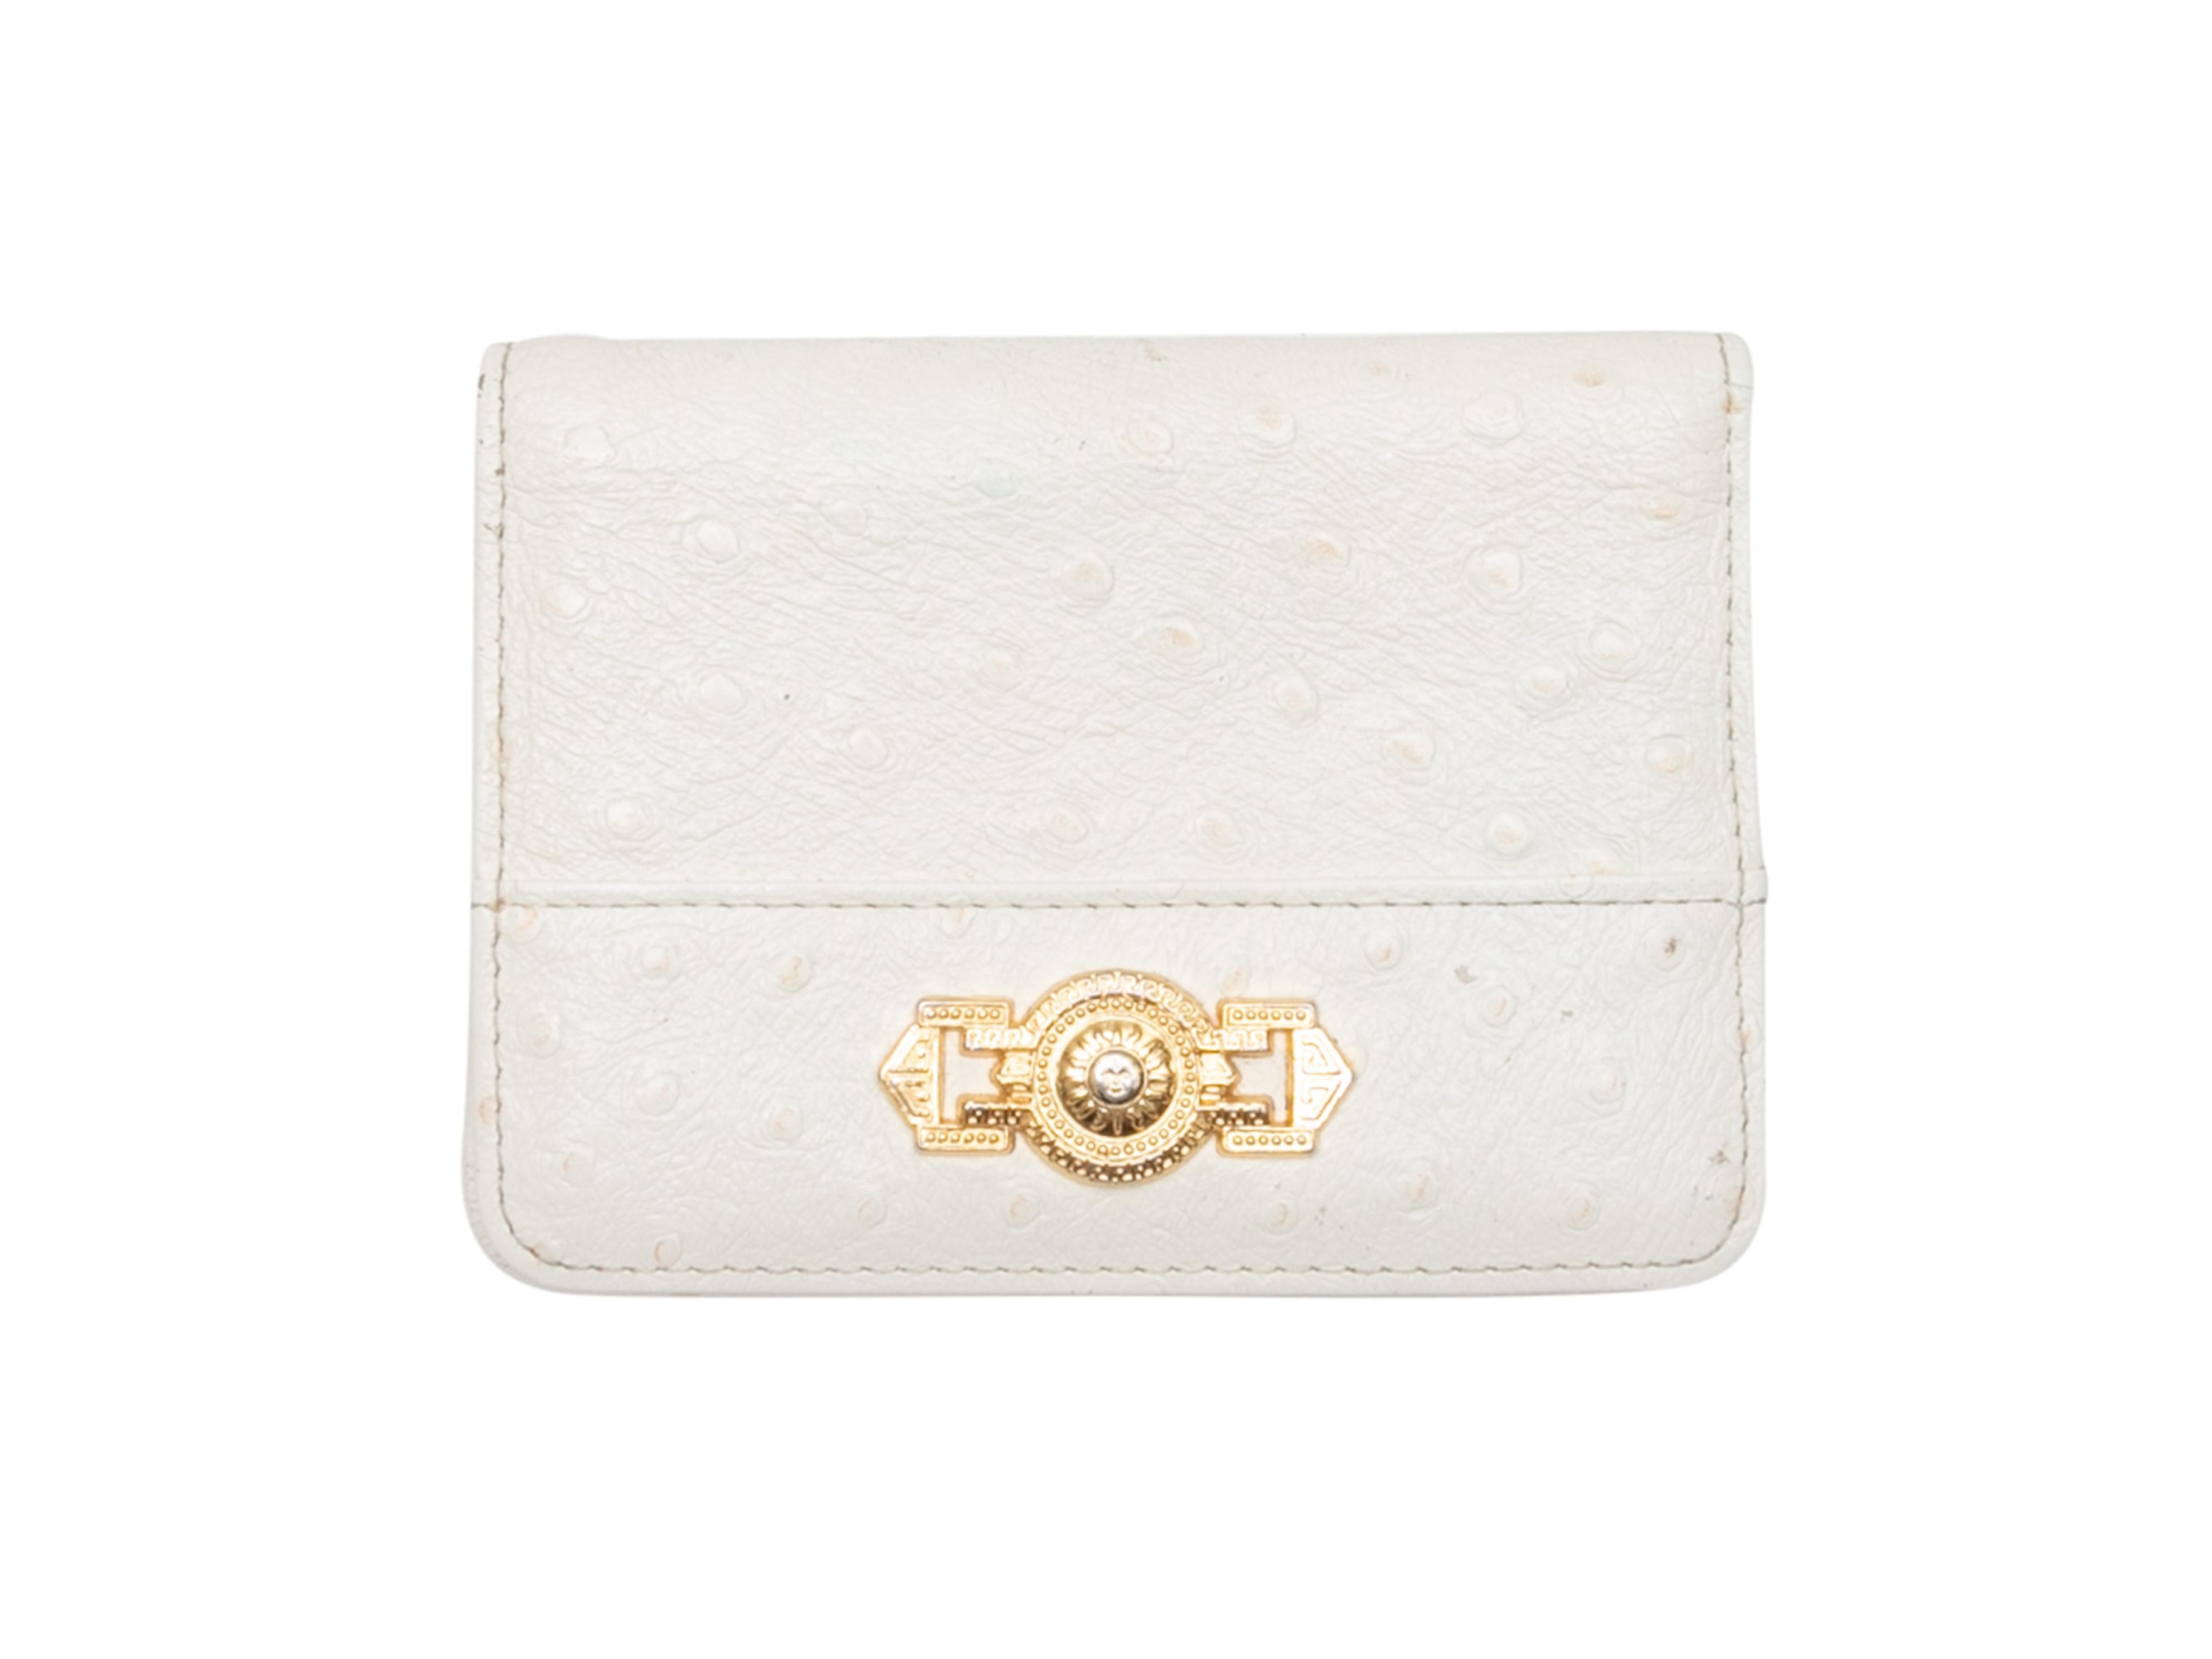 Women's or Men's Vintage White Gianni Versace Ostrich Leather Wallet For Sale